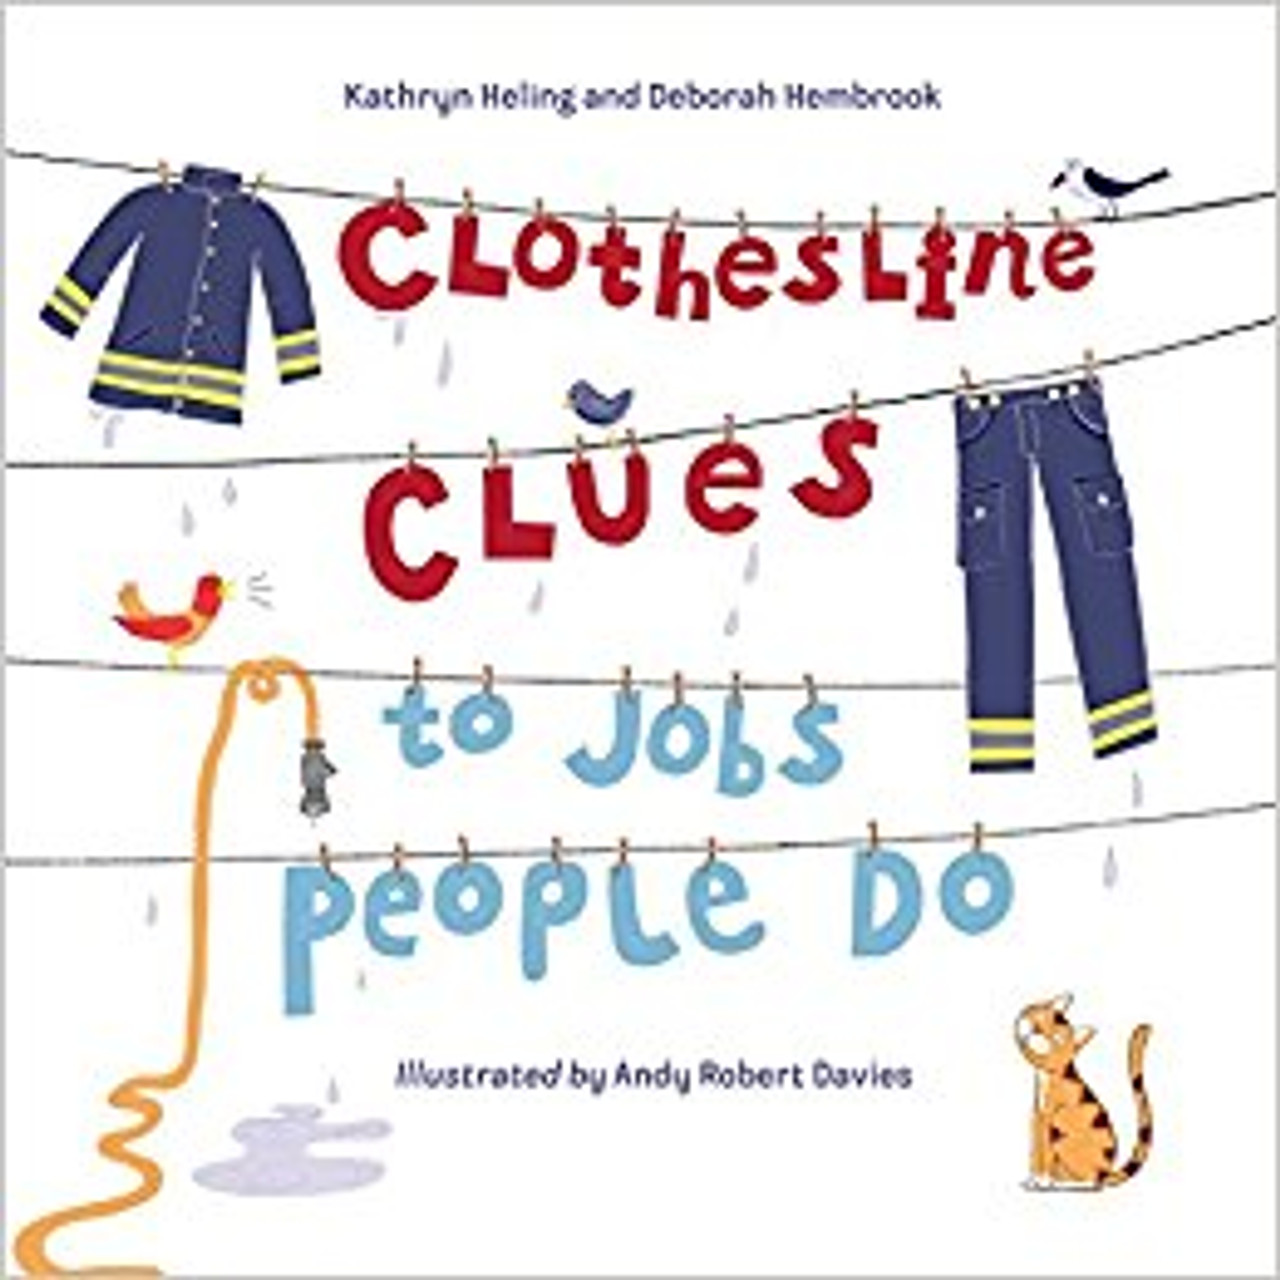 Through lively, accessible verse, readers identify recognizable careers that are fundamental to most communities. Look on and below seven clotheslines and spot colorful items, including the mail carrier's uniform, the artist's brushes, and the chef's apron. Then turn the page to learn which professionals wear and use the special gear in the jobs they do. Clever illustrations show the workers helping one another, and in the end, everyone joins together for a celebration that is out of this world.